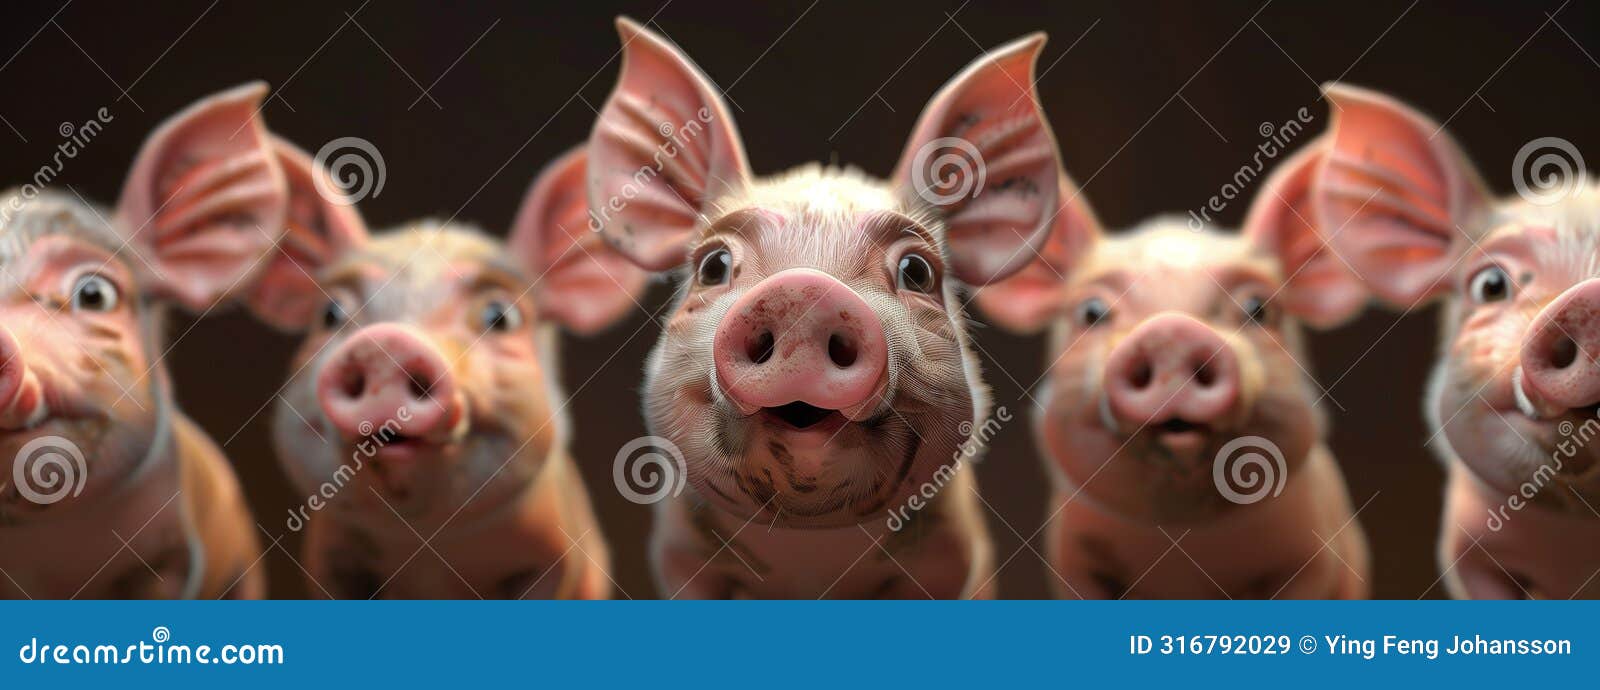 capture a moment of collective distress and disbelief as a bunch of pigs look up.